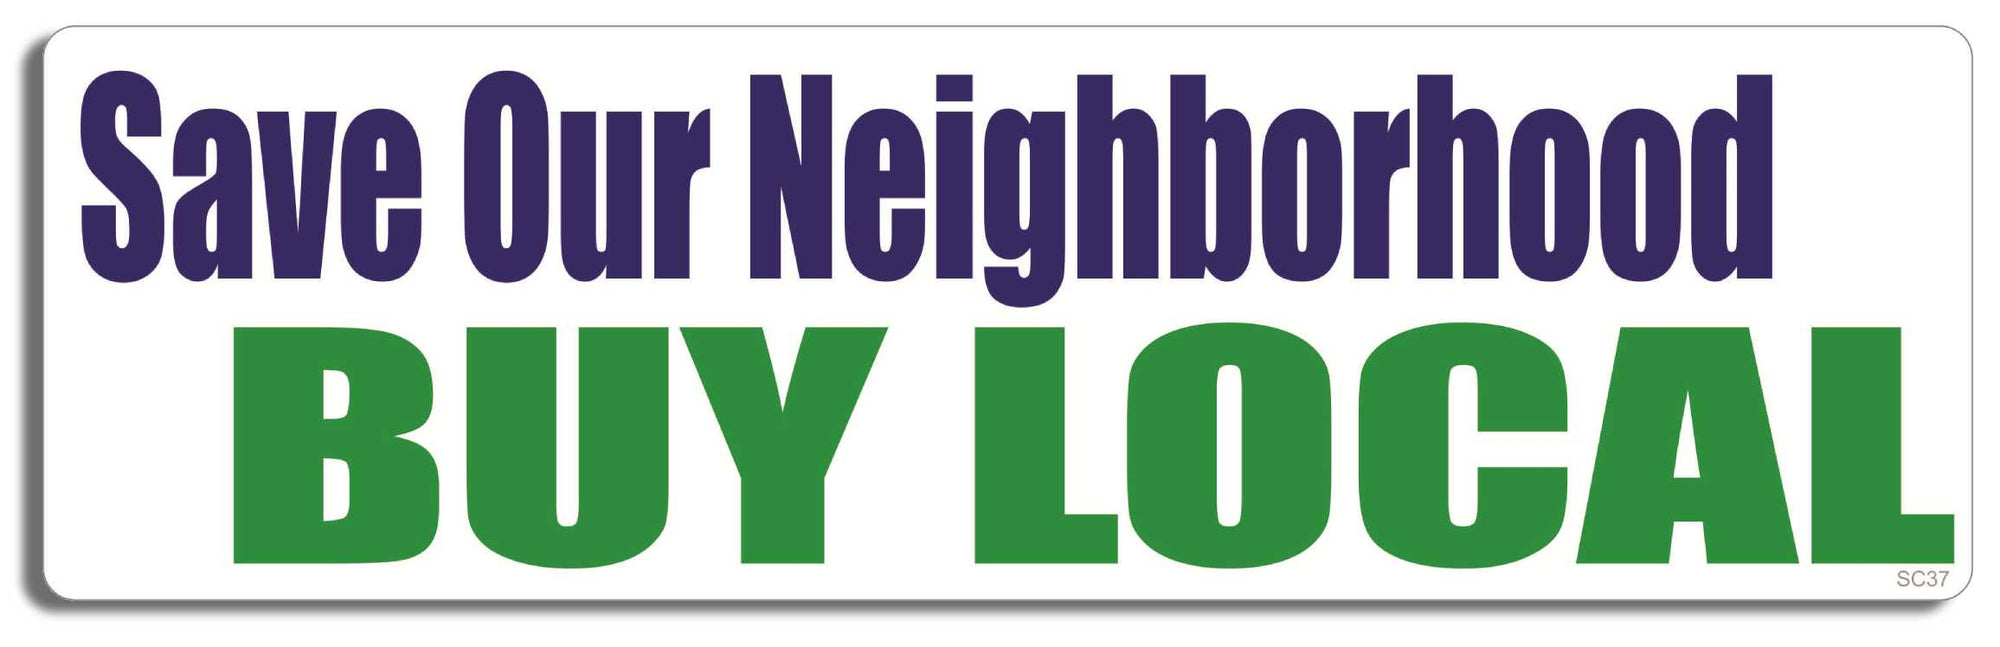 Save our neighborhood - buy local - 3" x 10" Bumper Sticker--Car Magnet- -  Decal Bumper Sticker-political Bumper Sticker Car Magnet Save our neighborhood-buy local-  Decal for carsconservative, liberal, Political